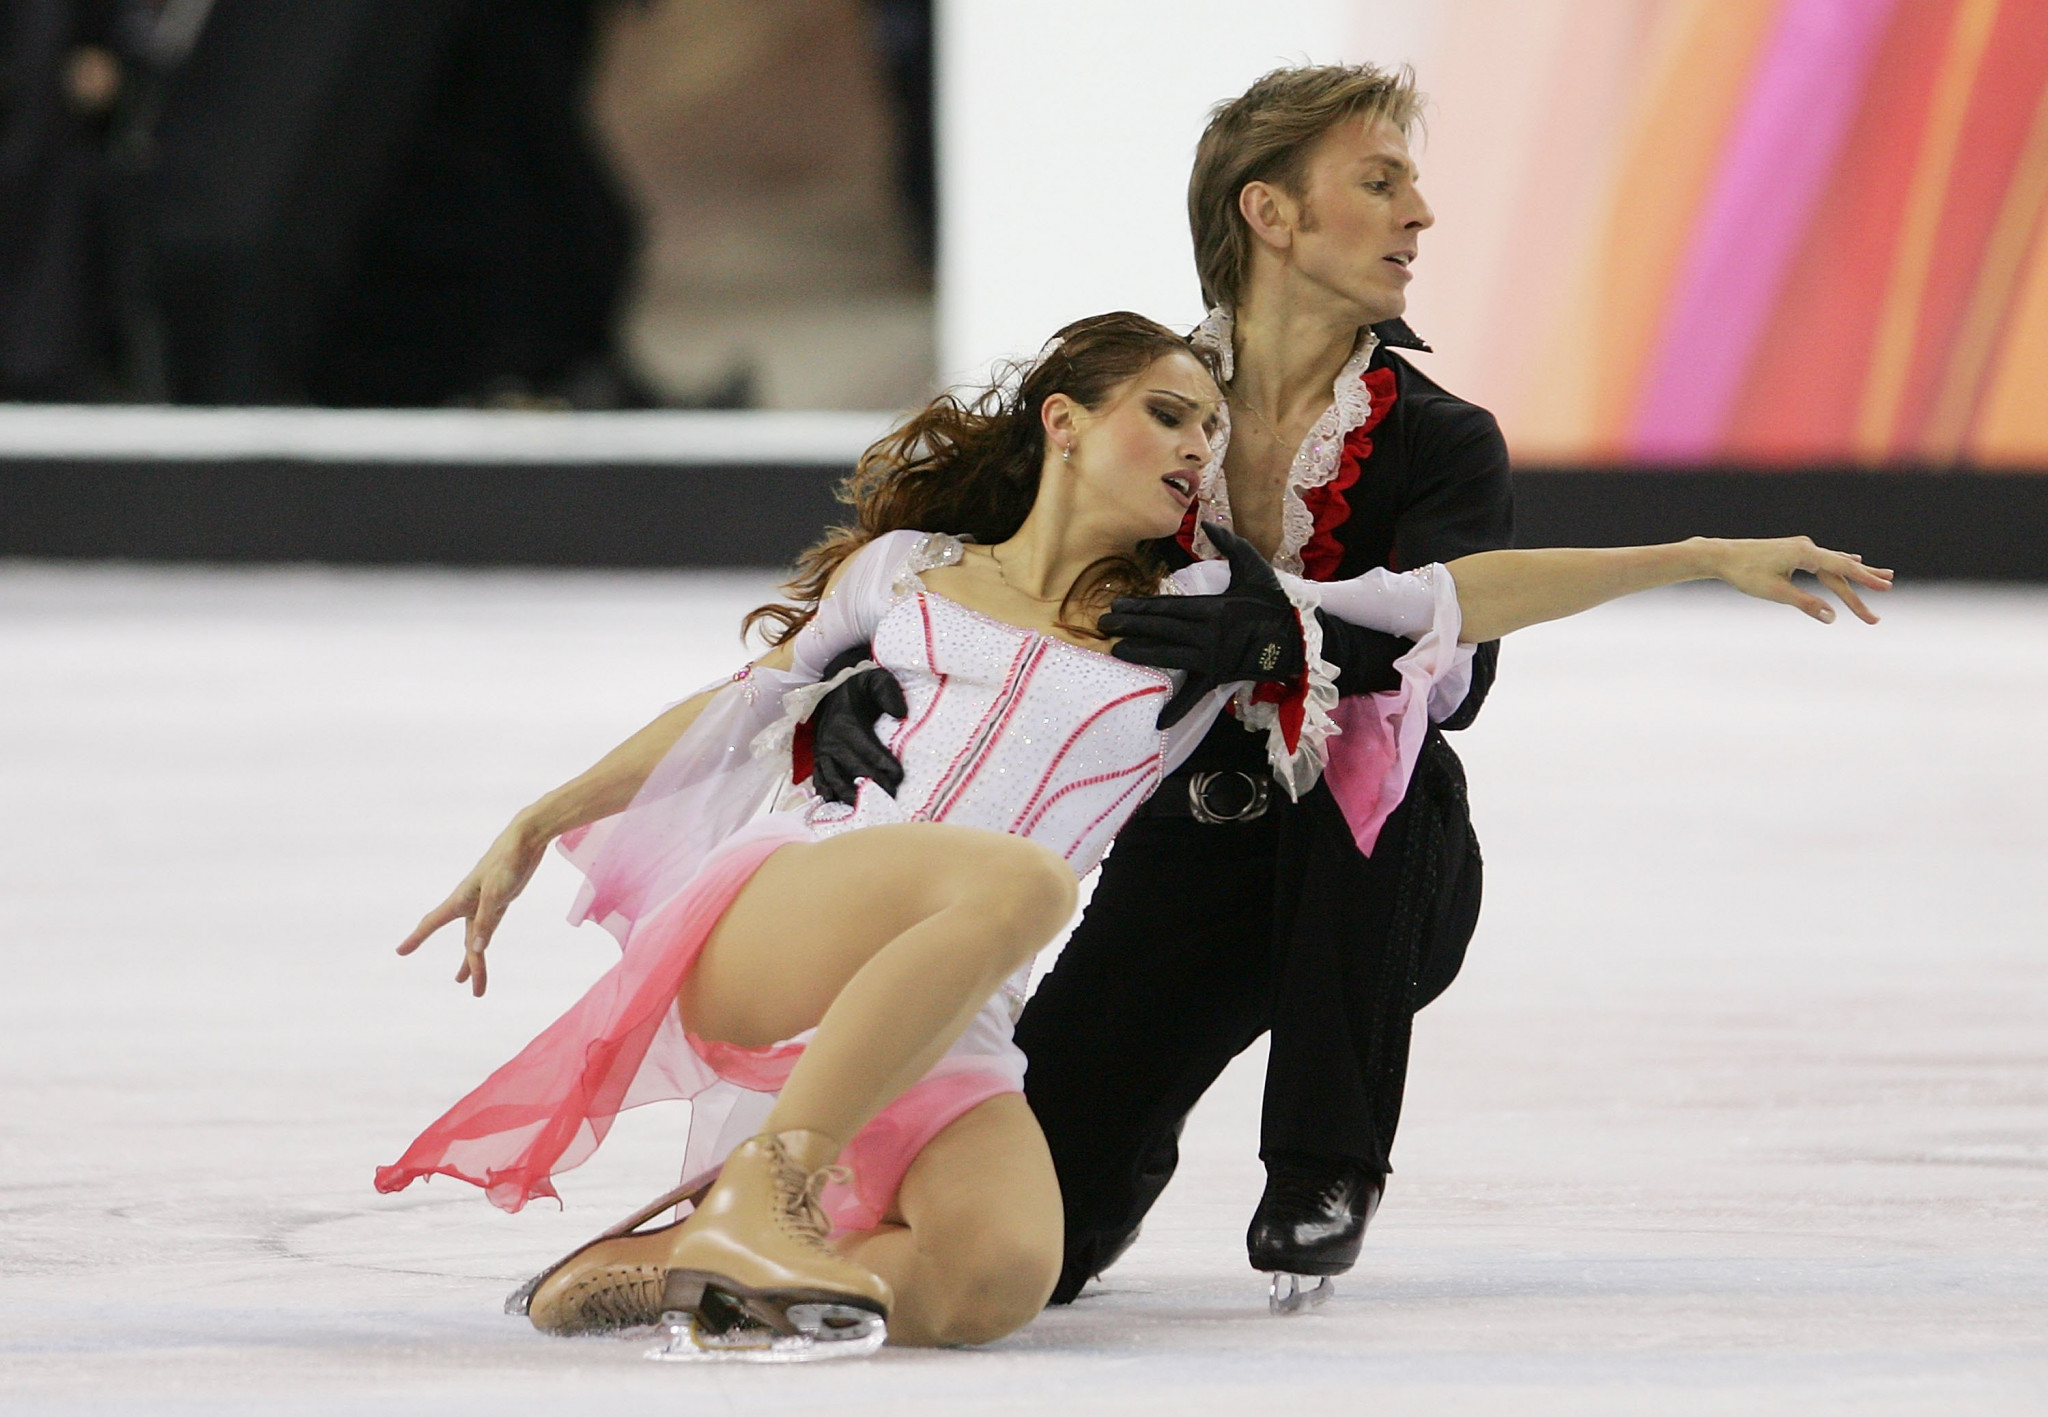 Margarita Drobiazko and Povilas Vanagas are continuing to compete in Russia ©Getty Images